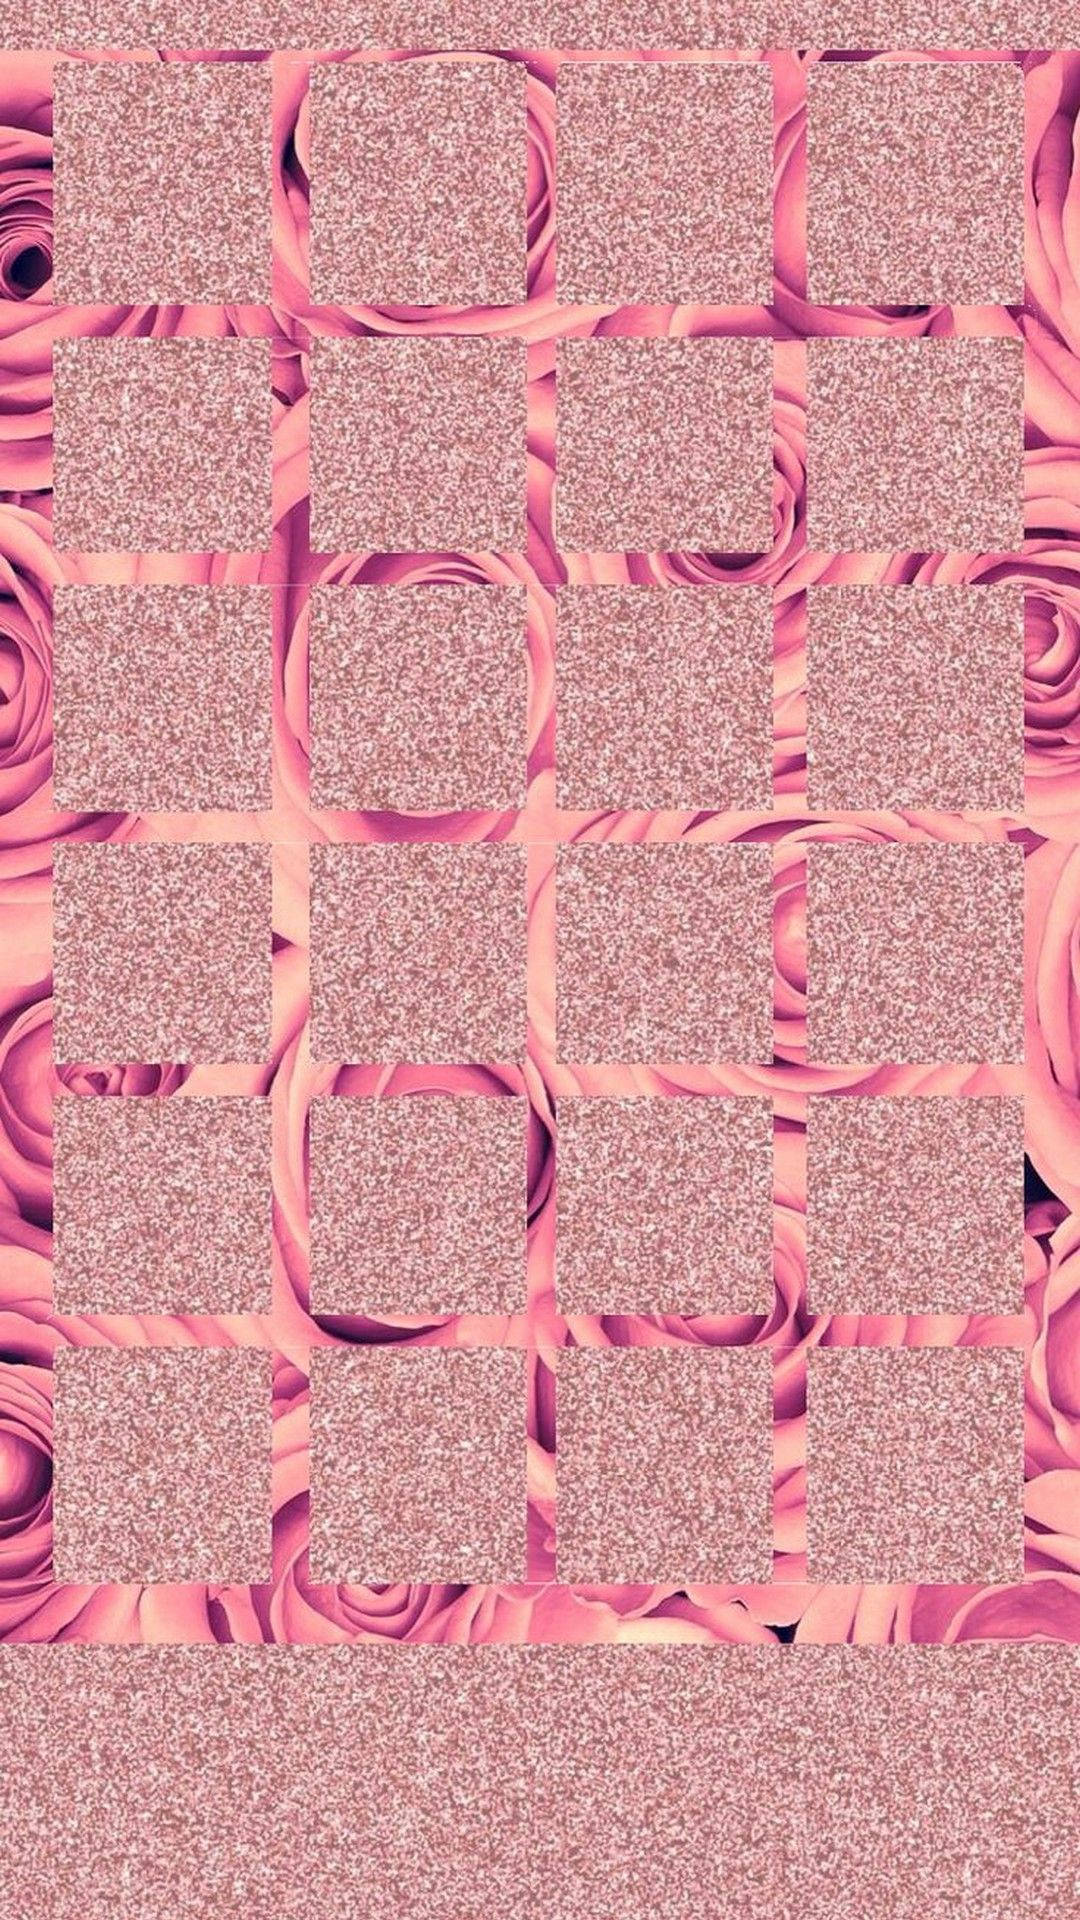 Square Pink Glitter Sparkle Iphone Wallpaper